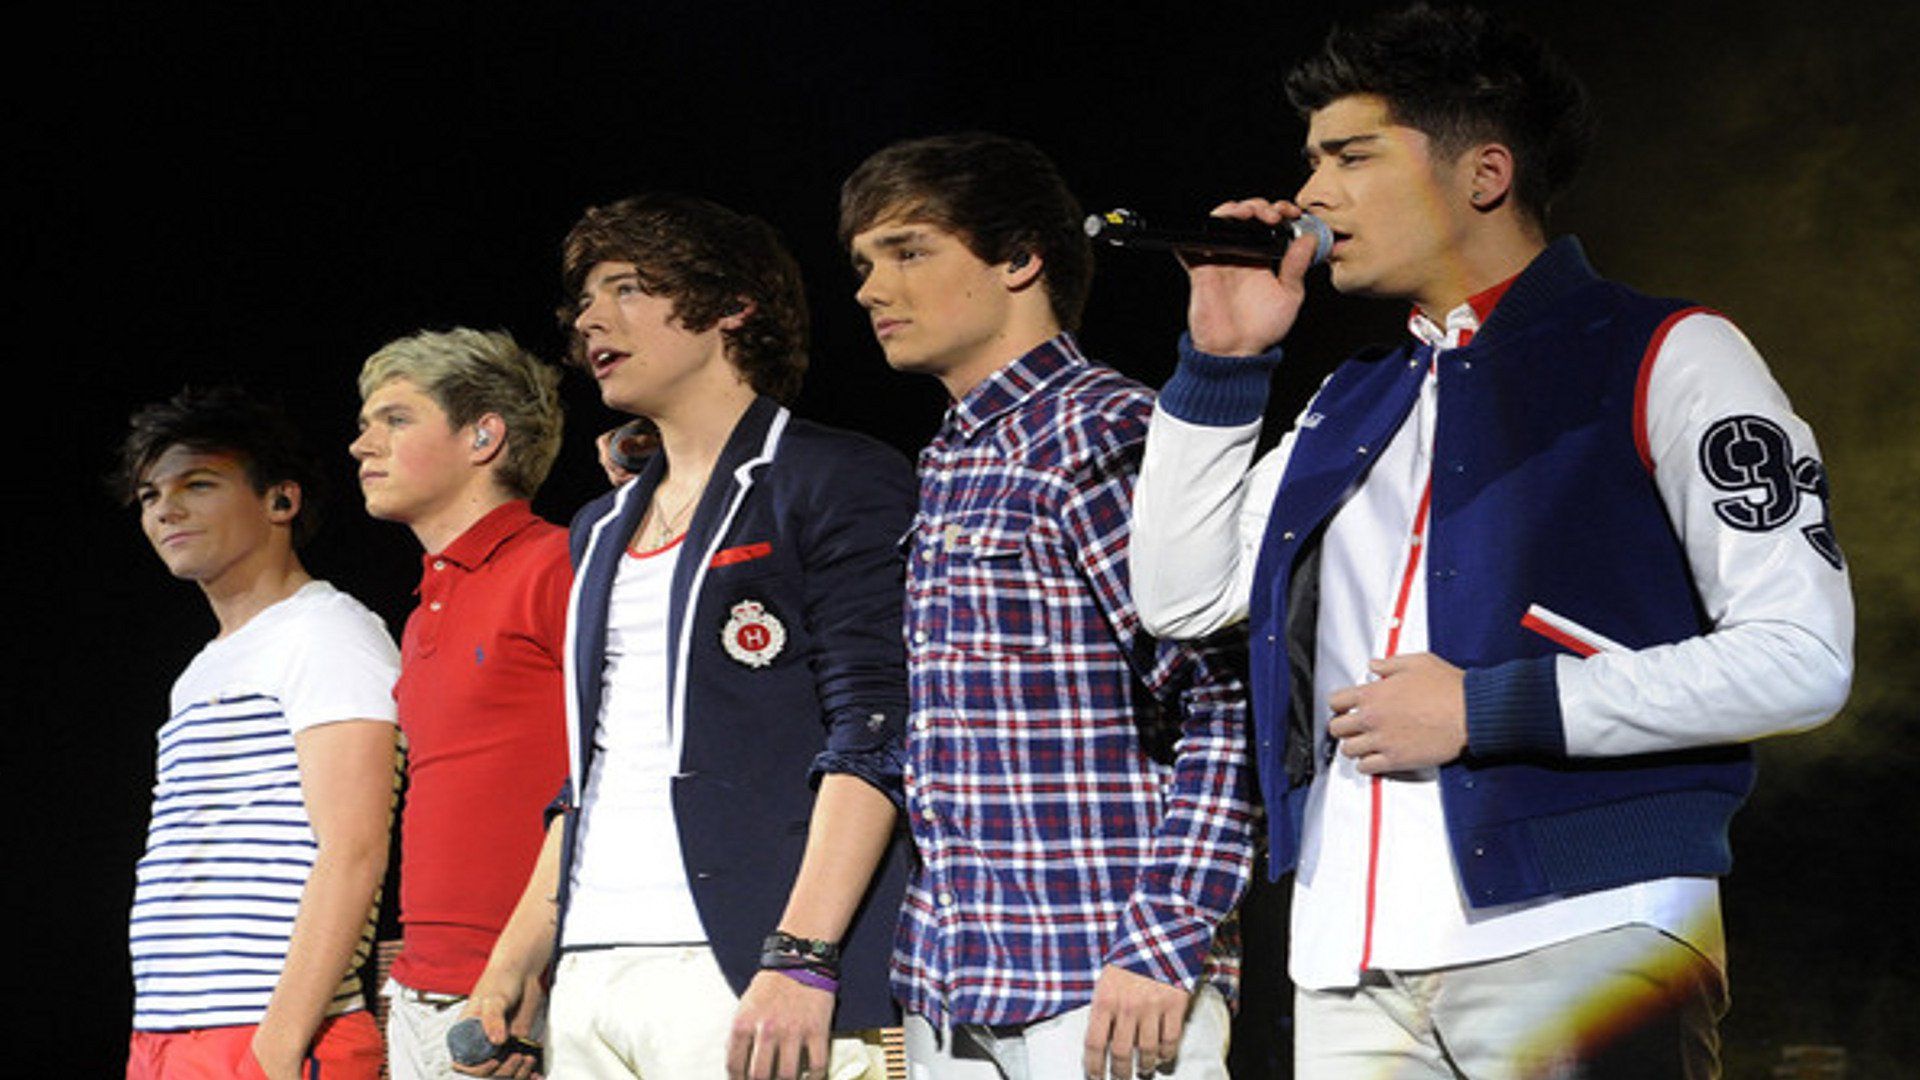 One Direction Up All Night 2012 Live - HD Wallpaper 